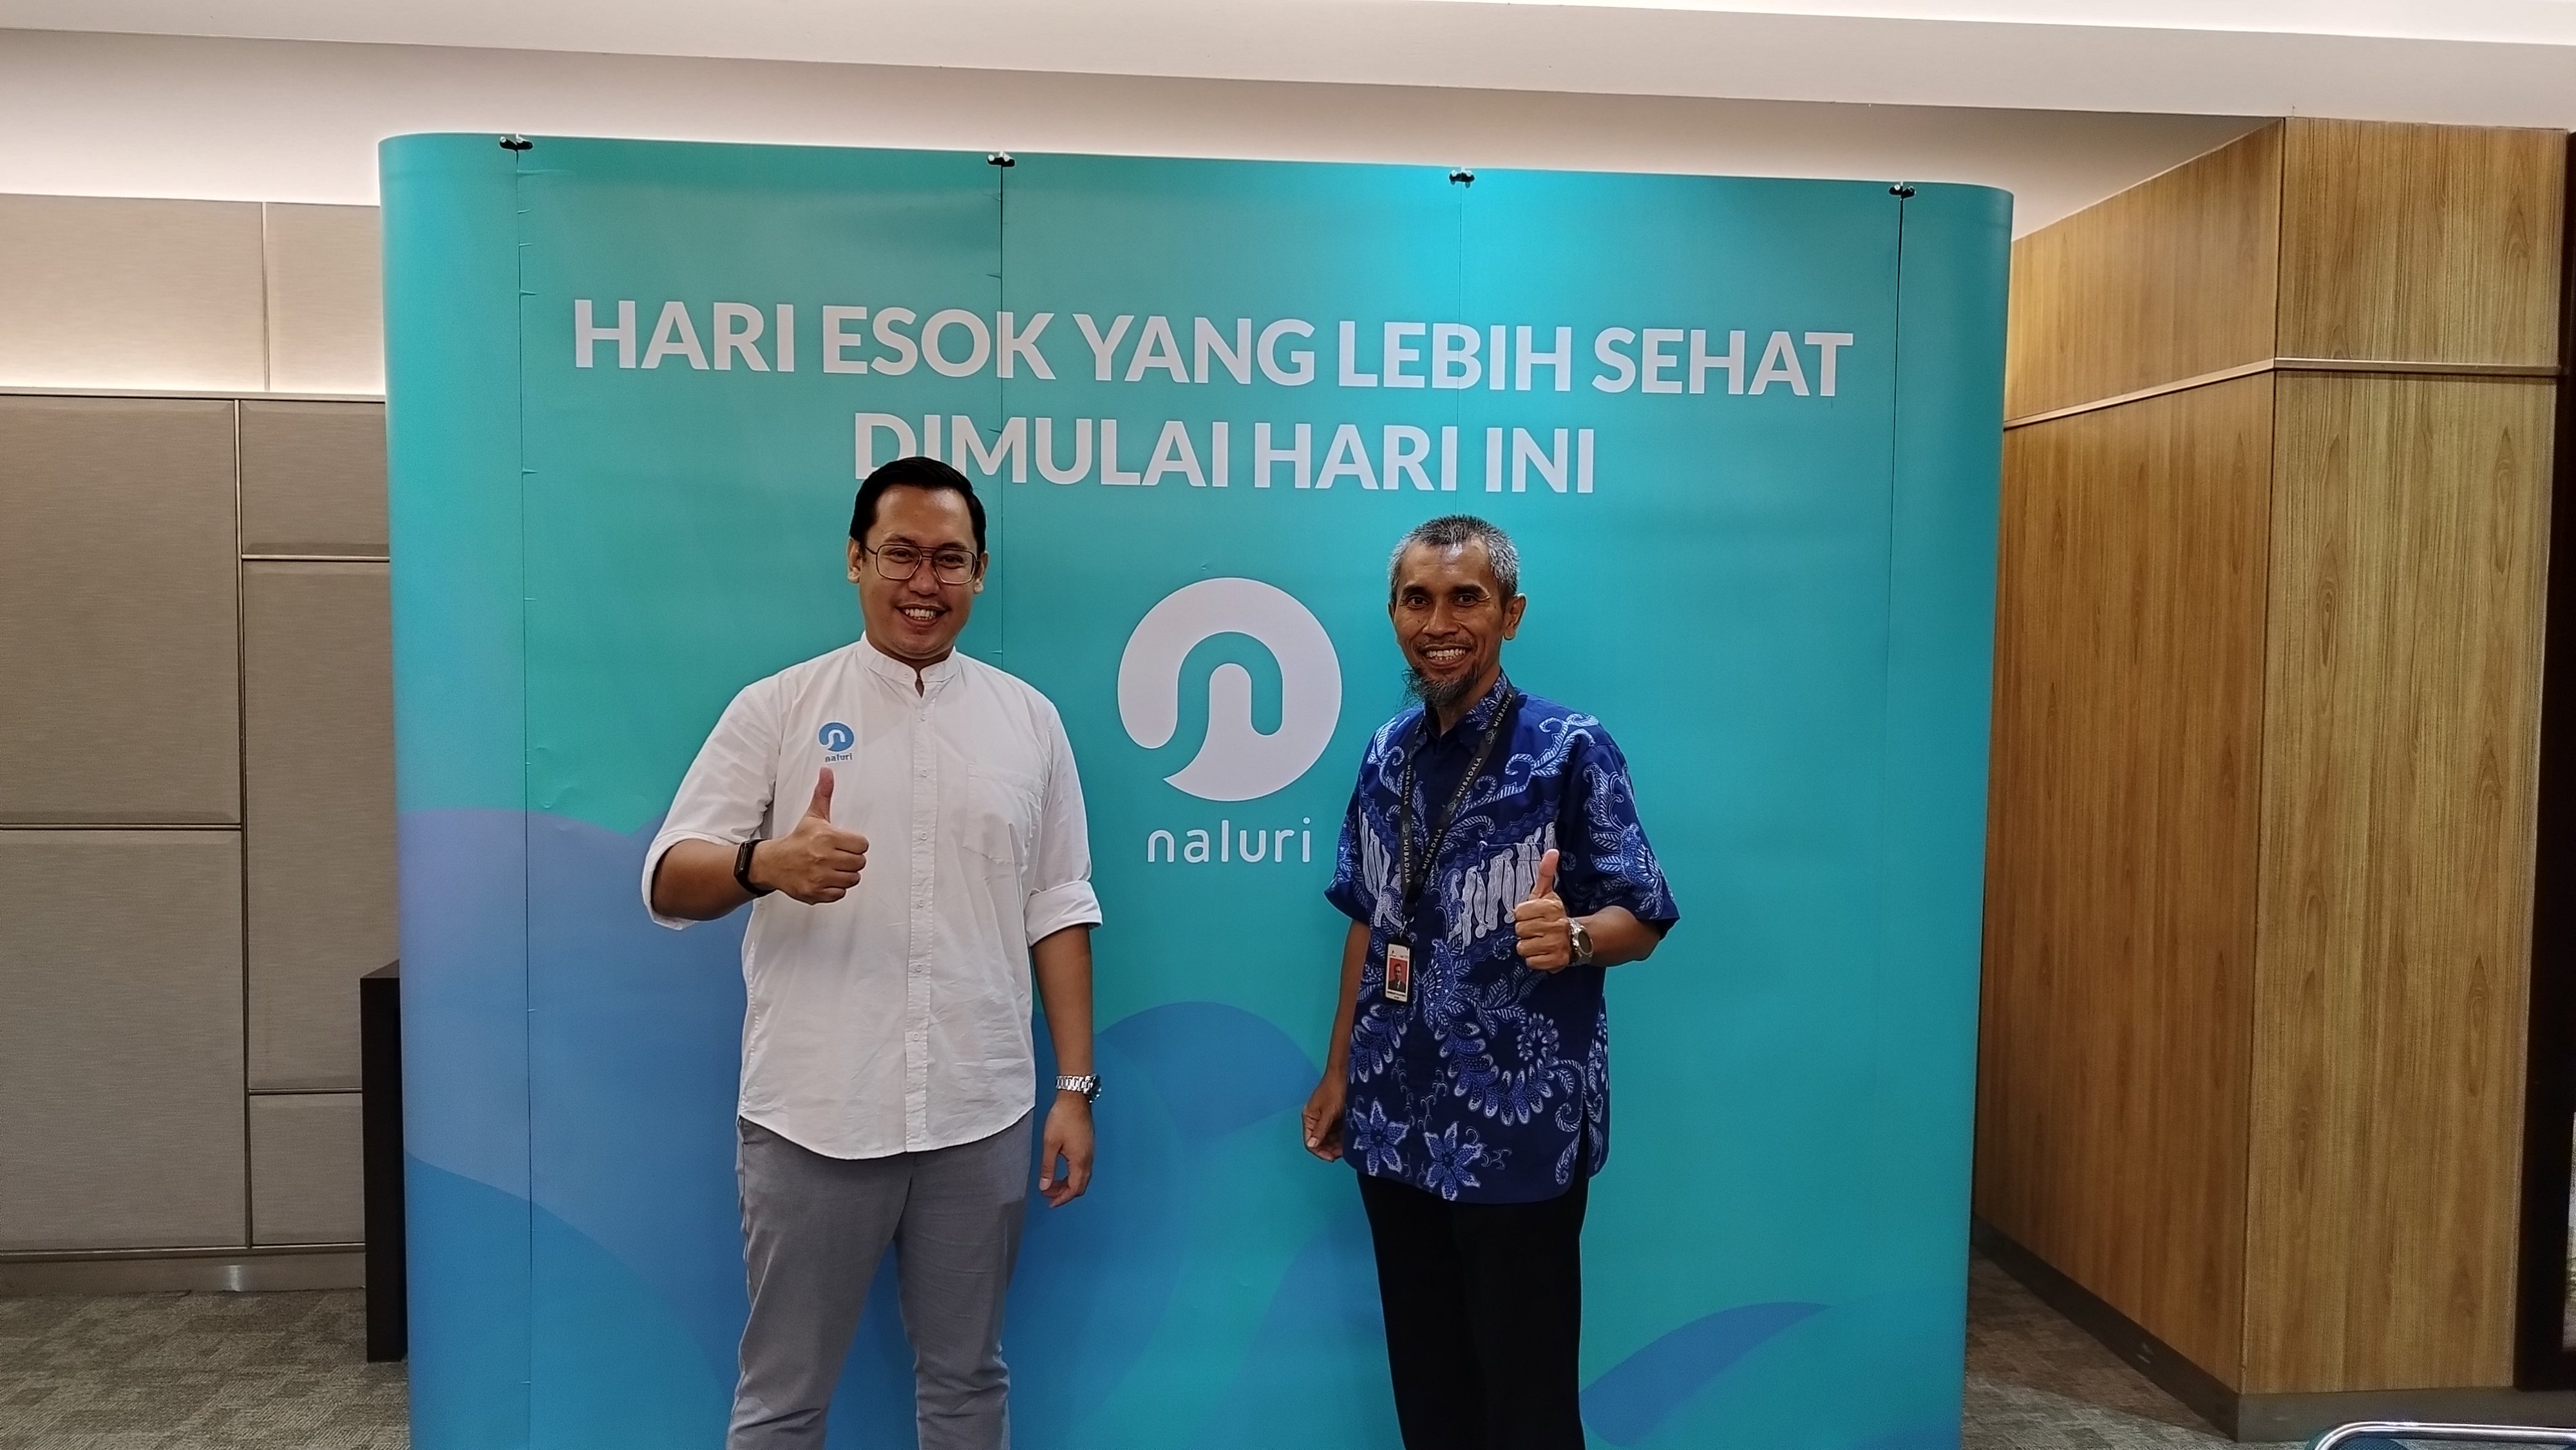 Doctor Hafidz from Naluri and Bambang Sujatmiko from Mubadala Energy post an official photo for this collaboration,